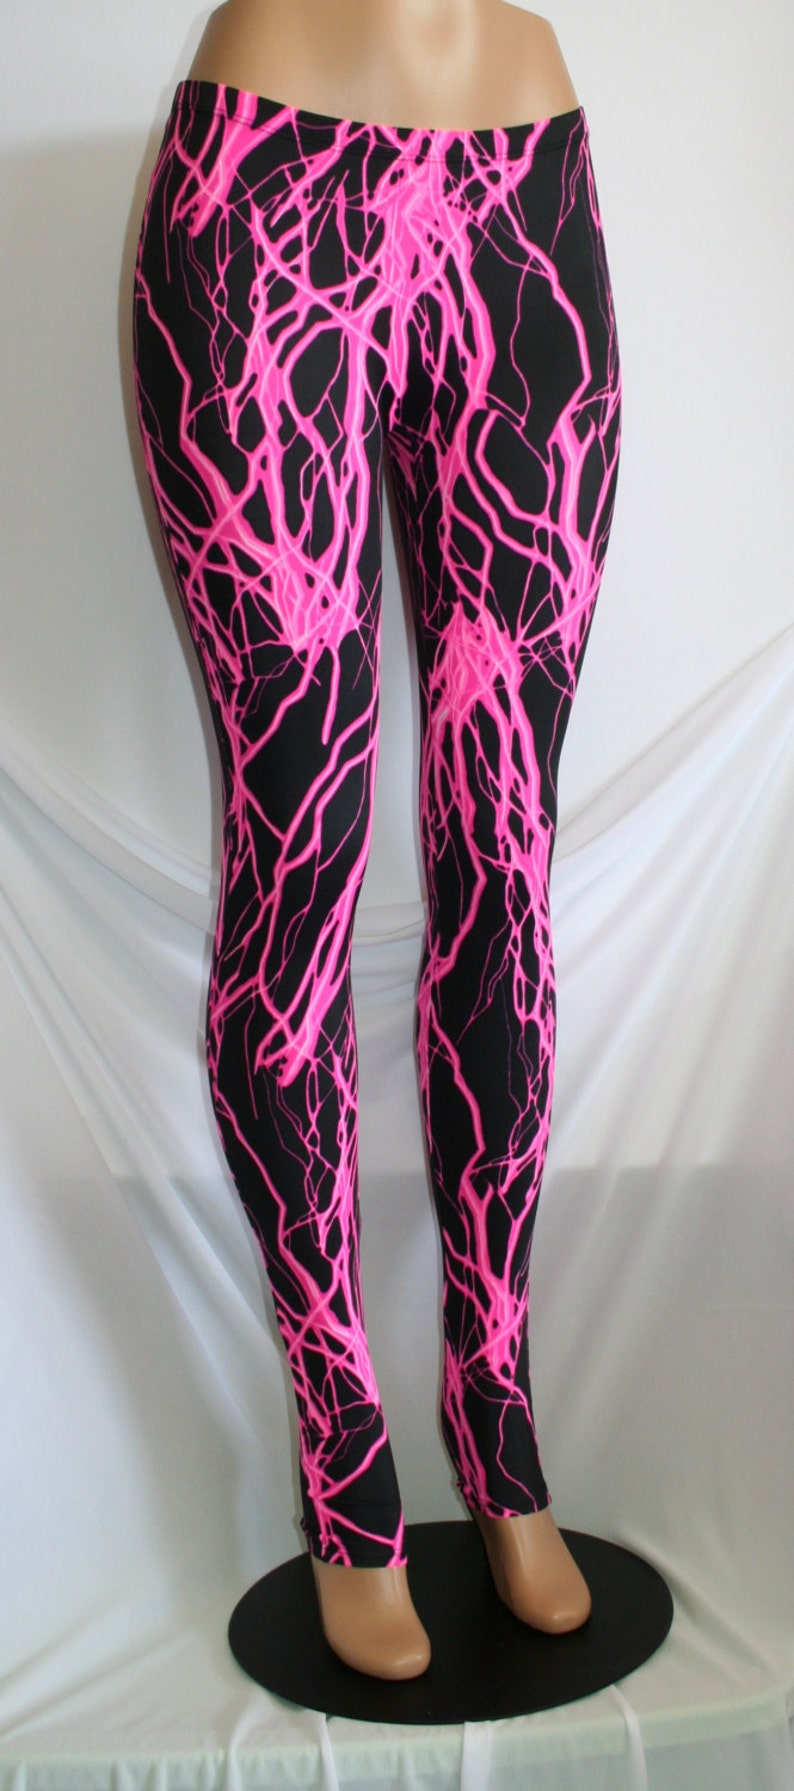 Glow Under Blacklight Storm Lightning Leggings in 5 Bright Colors Stretch Spandex great for Glo Parties Rave Roller Derby Cosplay Costume image 2